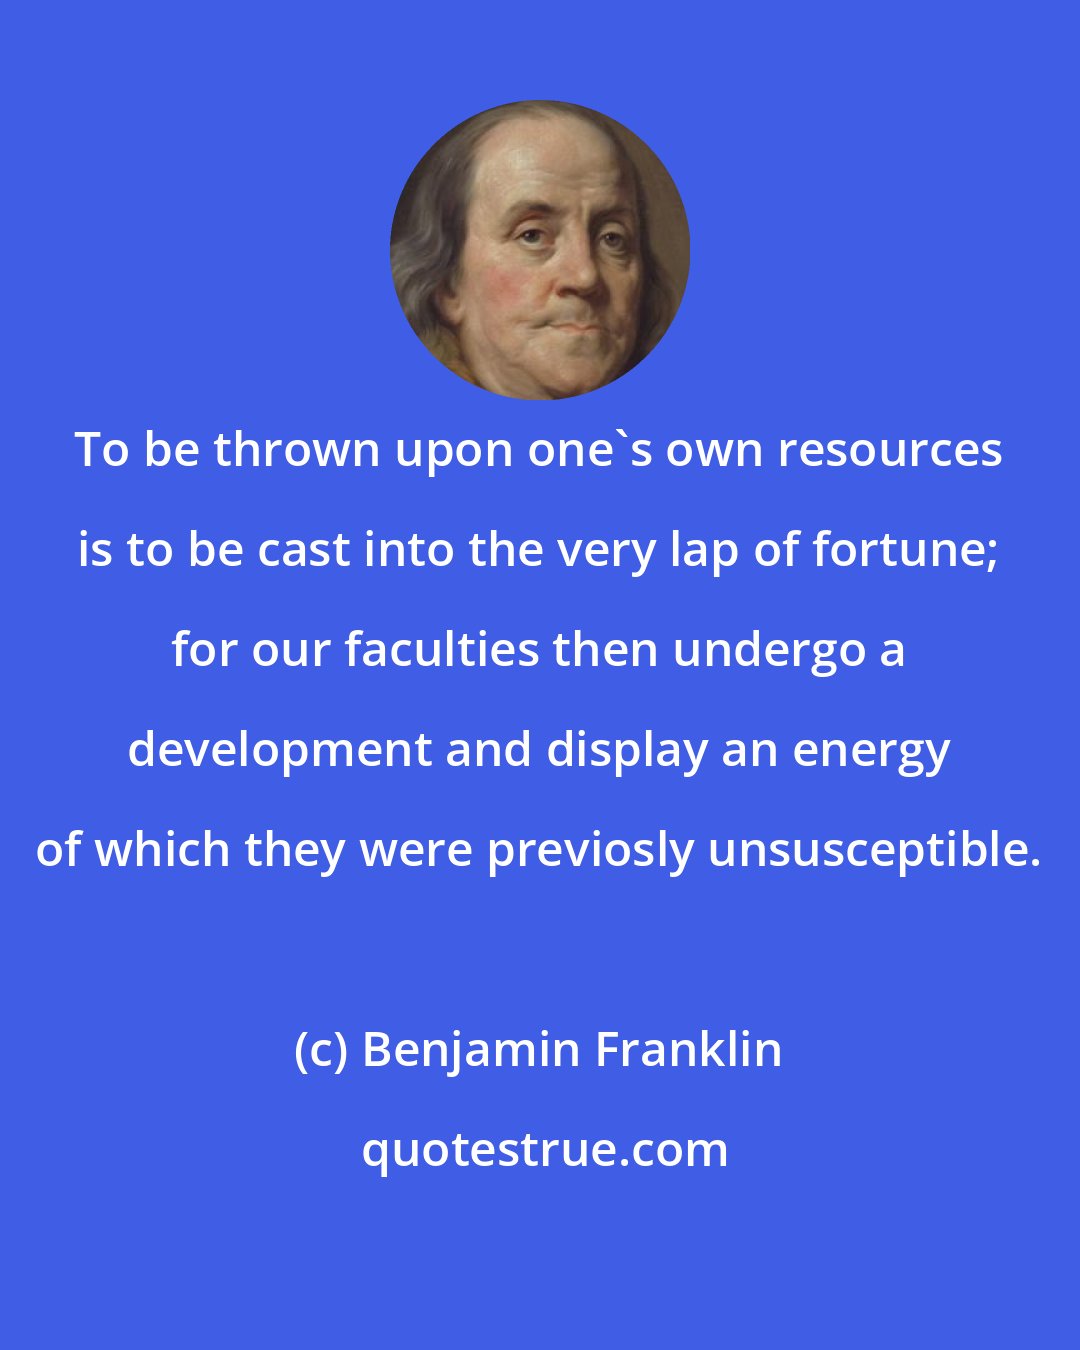 Benjamin Franklin: To be thrown upon one's own resources is to be cast into the very lap of fortune; for our faculties then undergo a development and display an energy of which they were previosly unsusceptible.